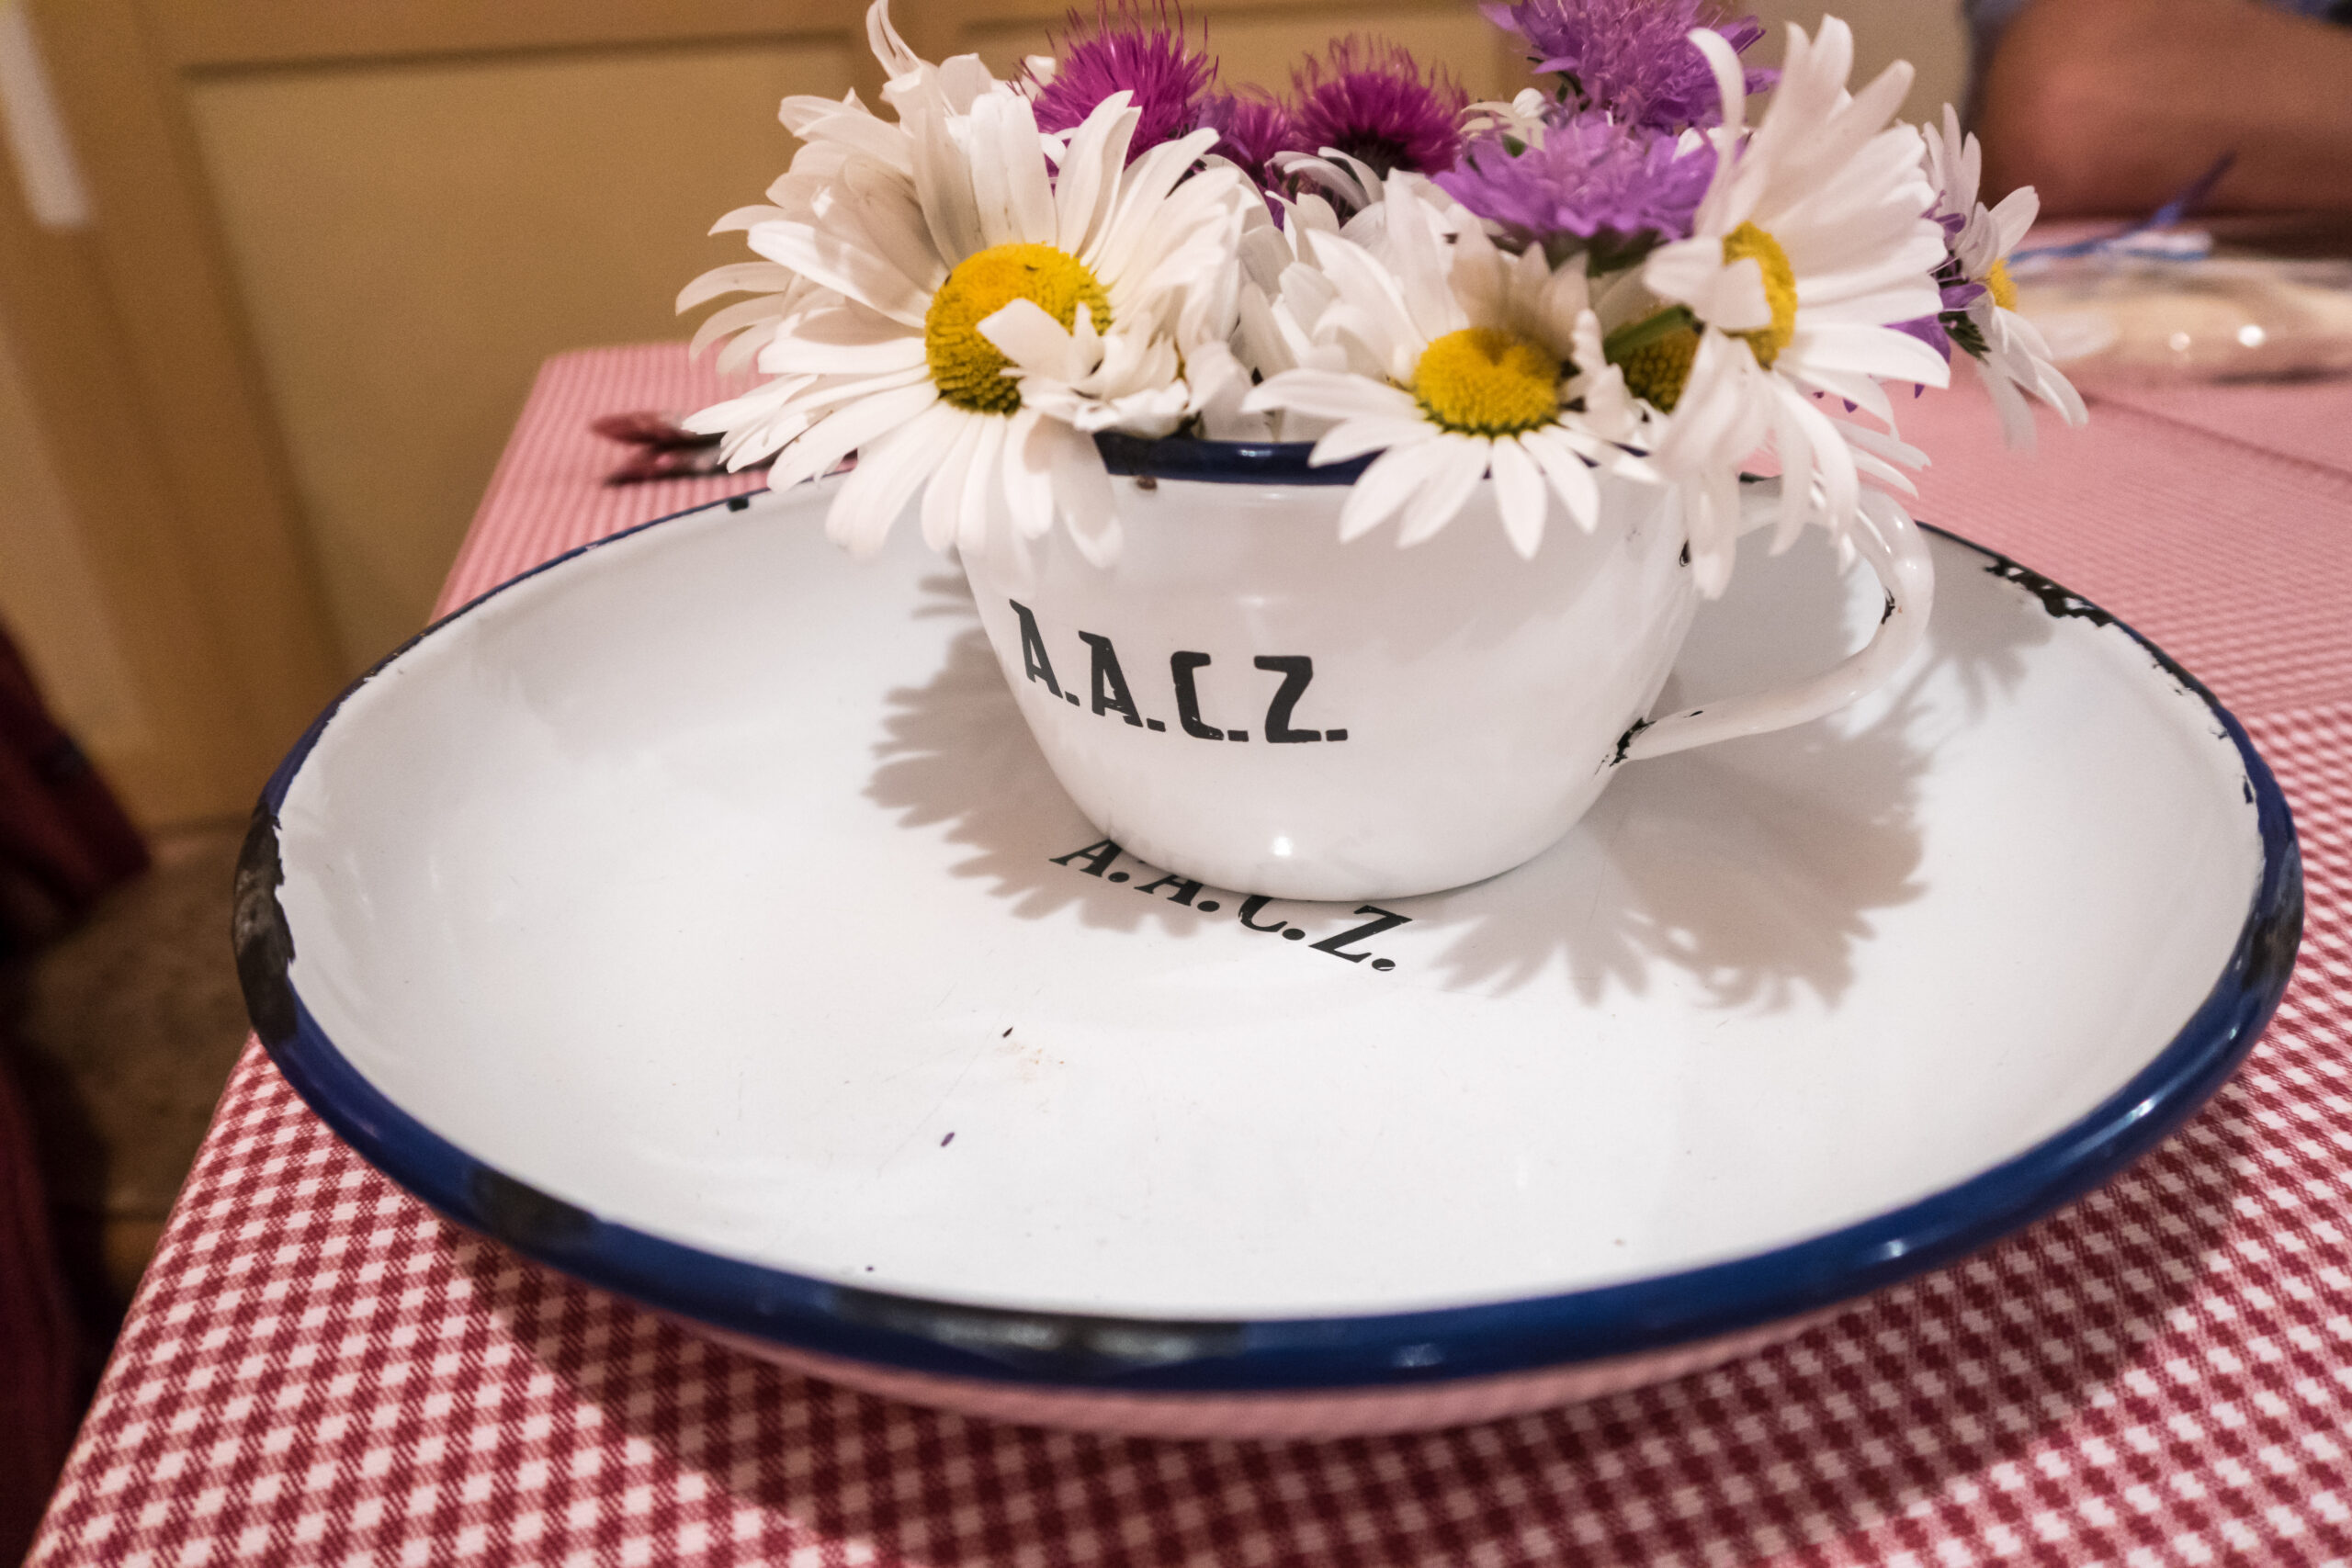 AACZ celebrates its 125th anniversary at the Stiftungsfest Maderanertal